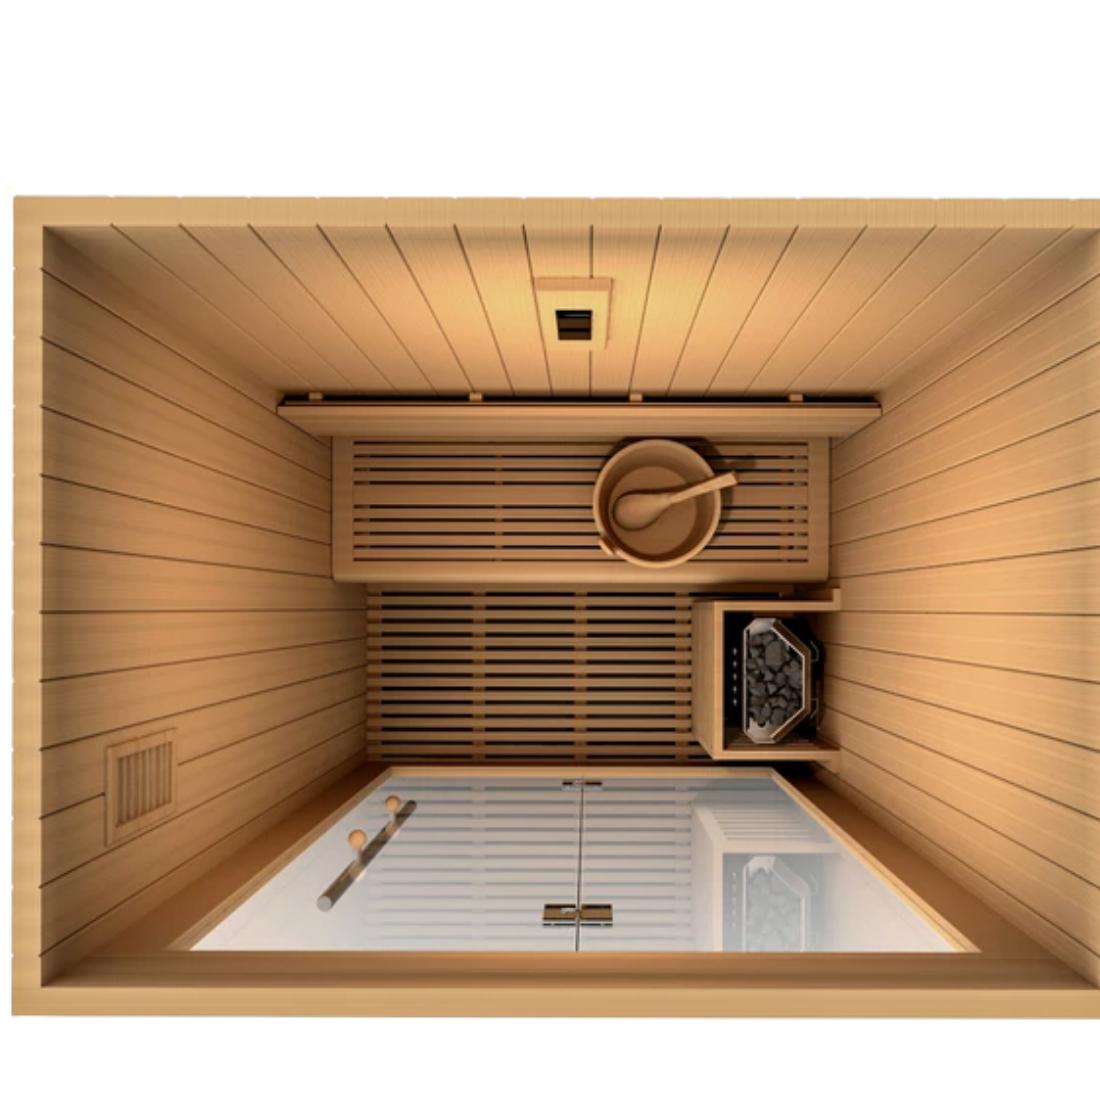 Golden Designs "Sundsvall Edition" 2-Person Traditional Steam Sauna - Canadian Red Cedar, GDI-7289-01 top down view